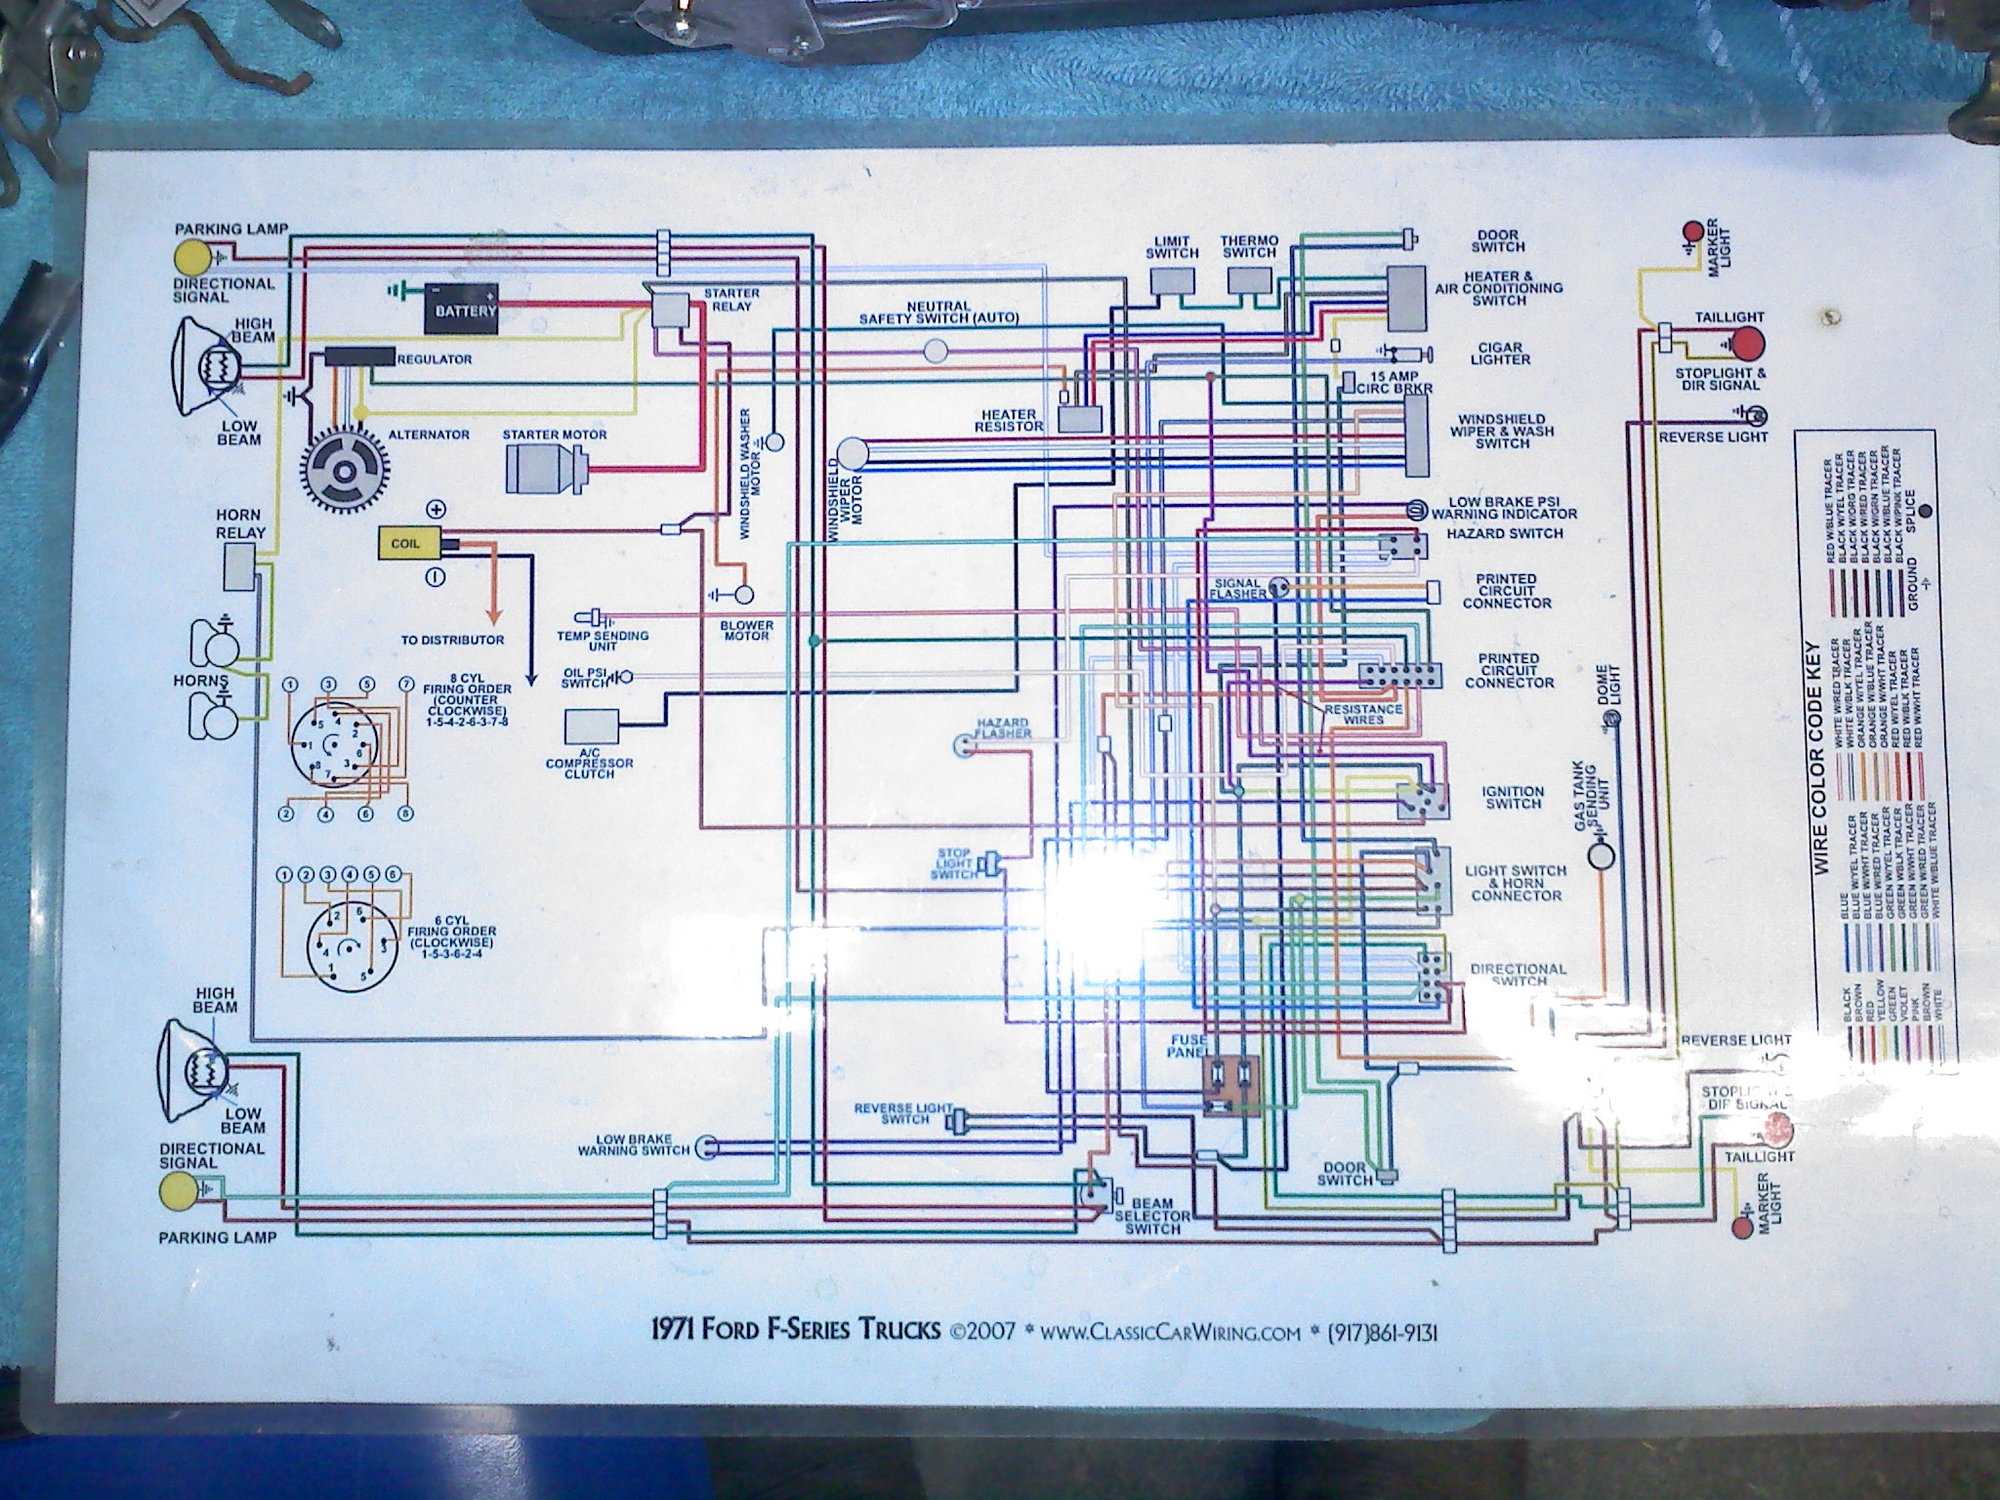 1971 Wiring Diagram - Page 2